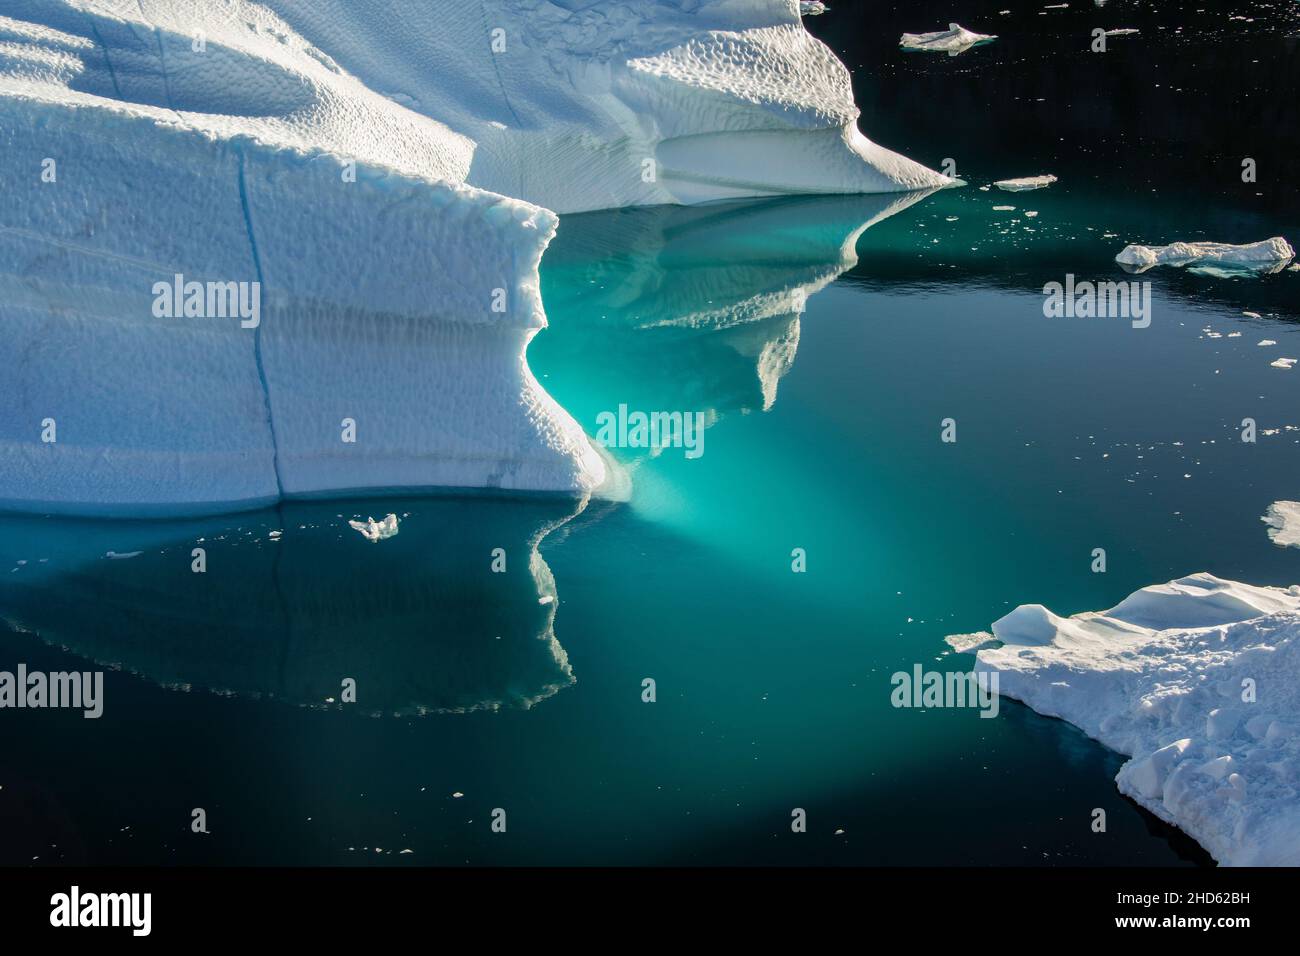 Water near an iceberg with luminescent blues and greens, Rodefjord, Scoresby Sund, Greenland Stock Photo